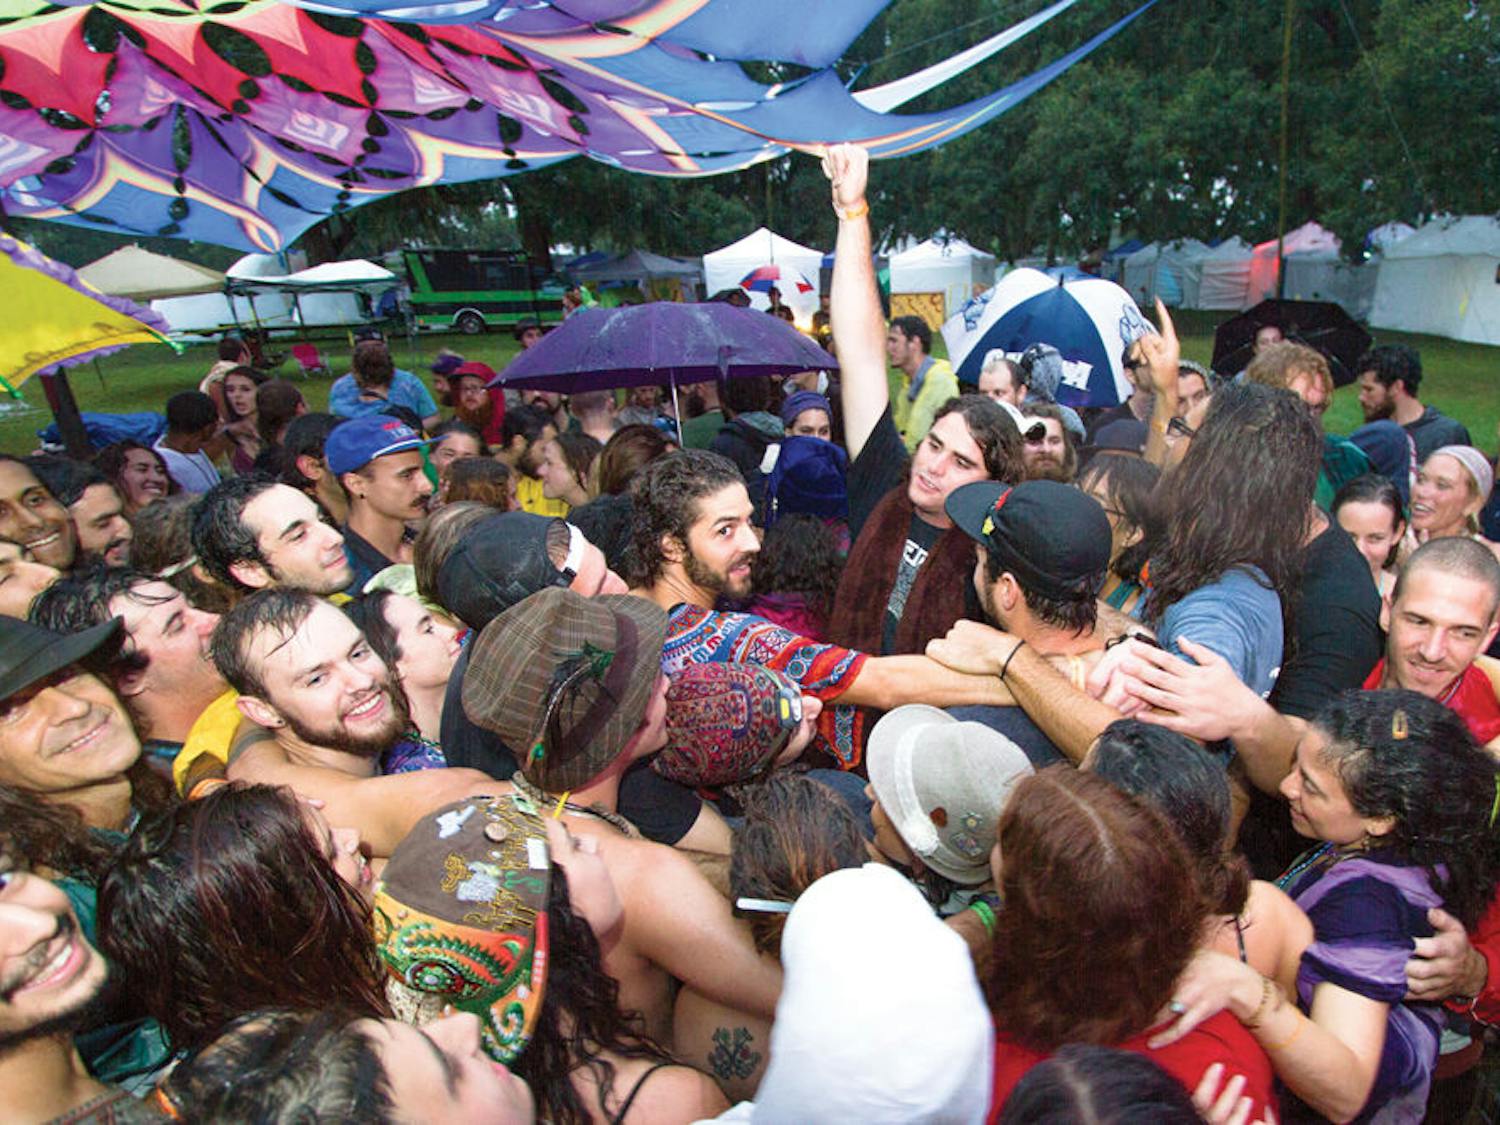 Earthdance attendees huddle for a group hug at Maddox Ranch in Lakeland, Florida on Saturday.